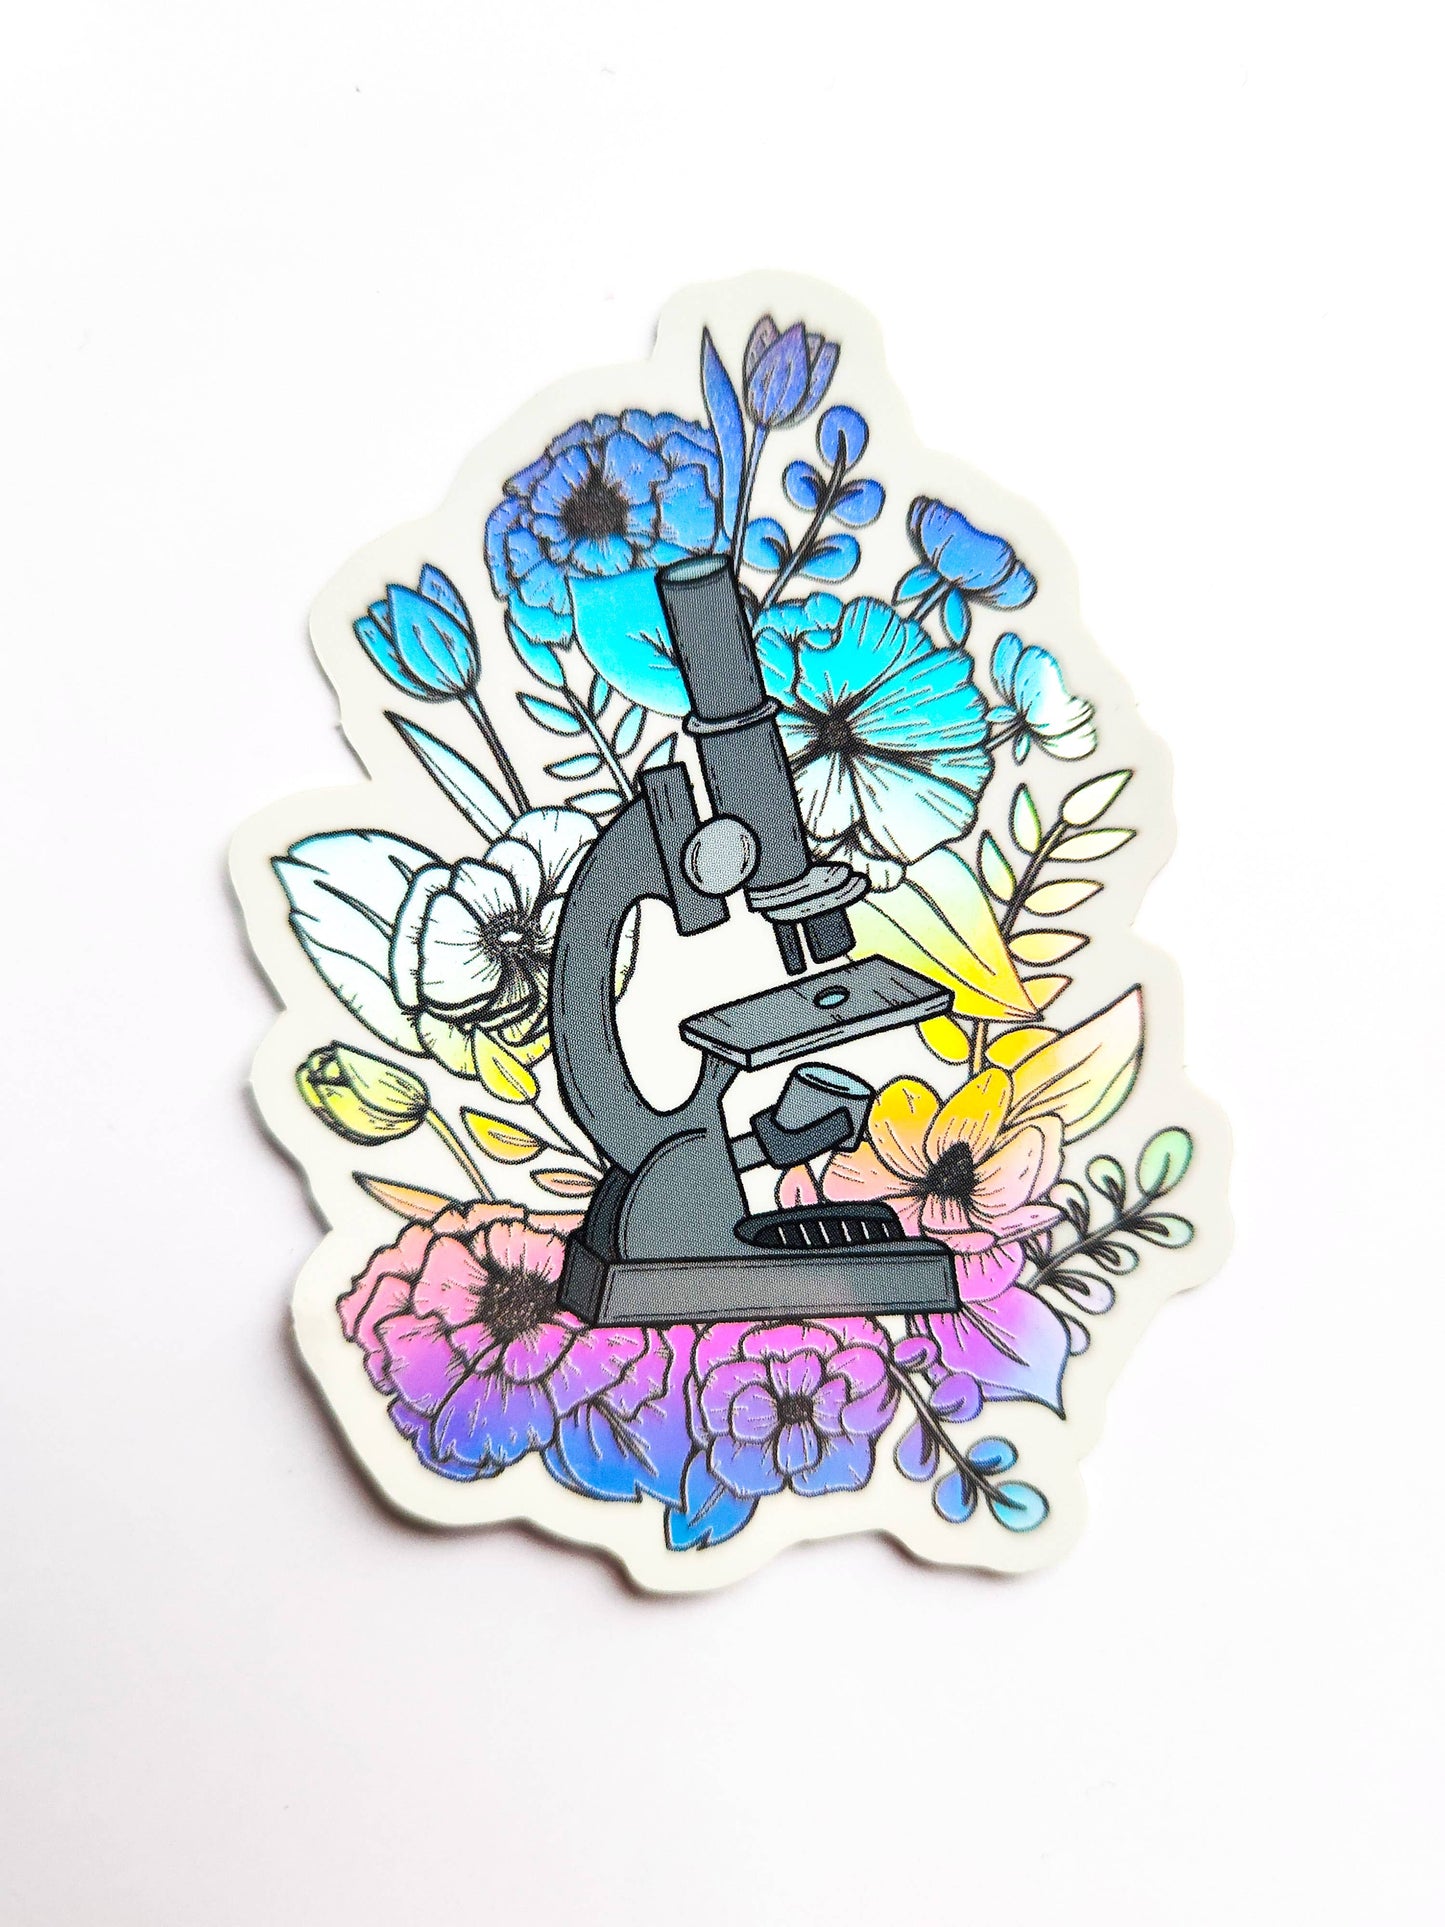 Holographic Microscope and Flowers Decal Sticker